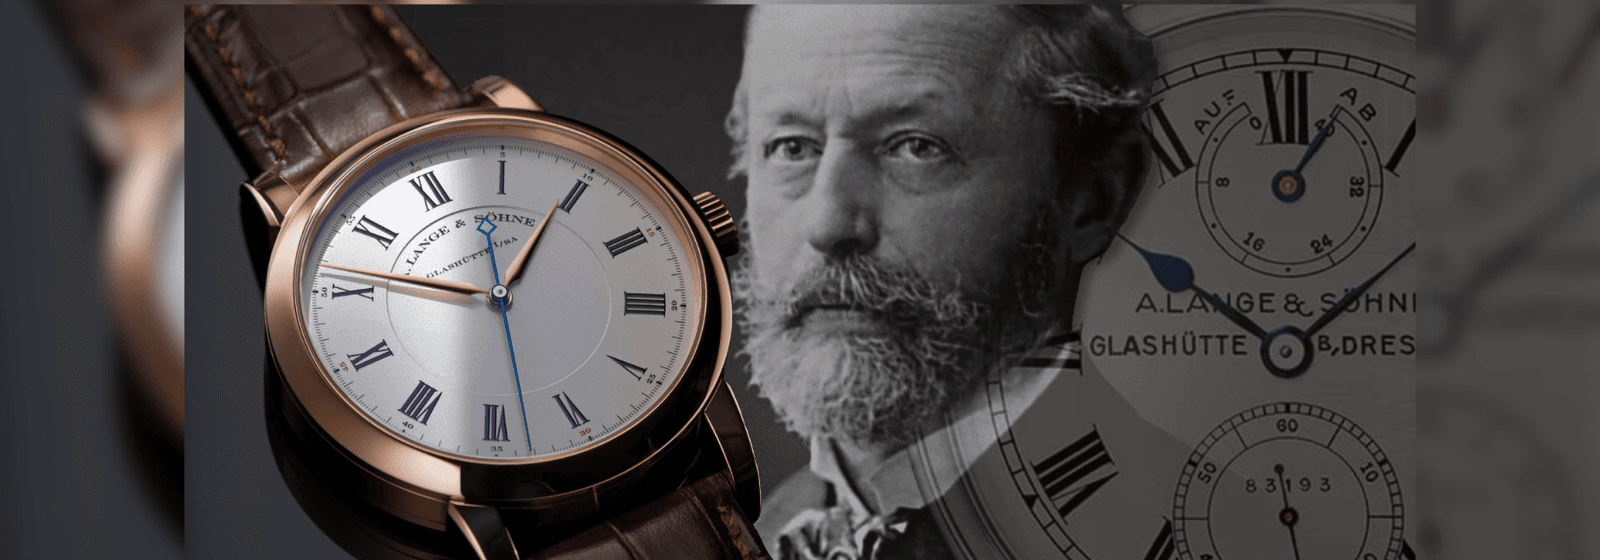 An In-Depth Look Into The A. Lange & Söhne’s Richard Lange